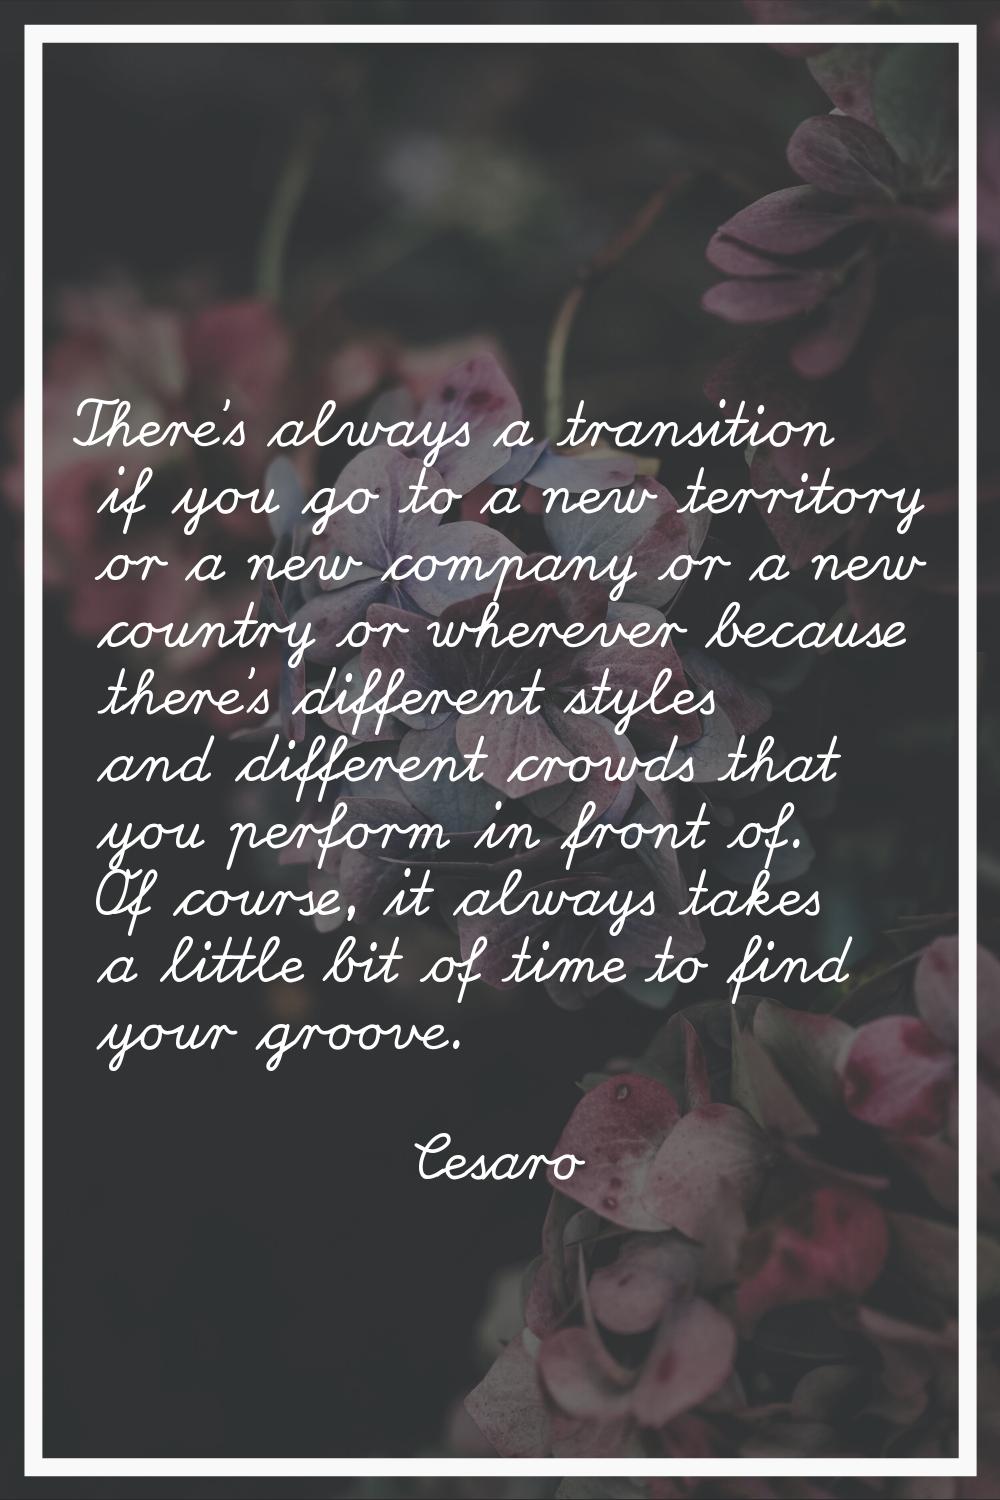 There's always a transition if you go to a new territory or a new company or a new country or where